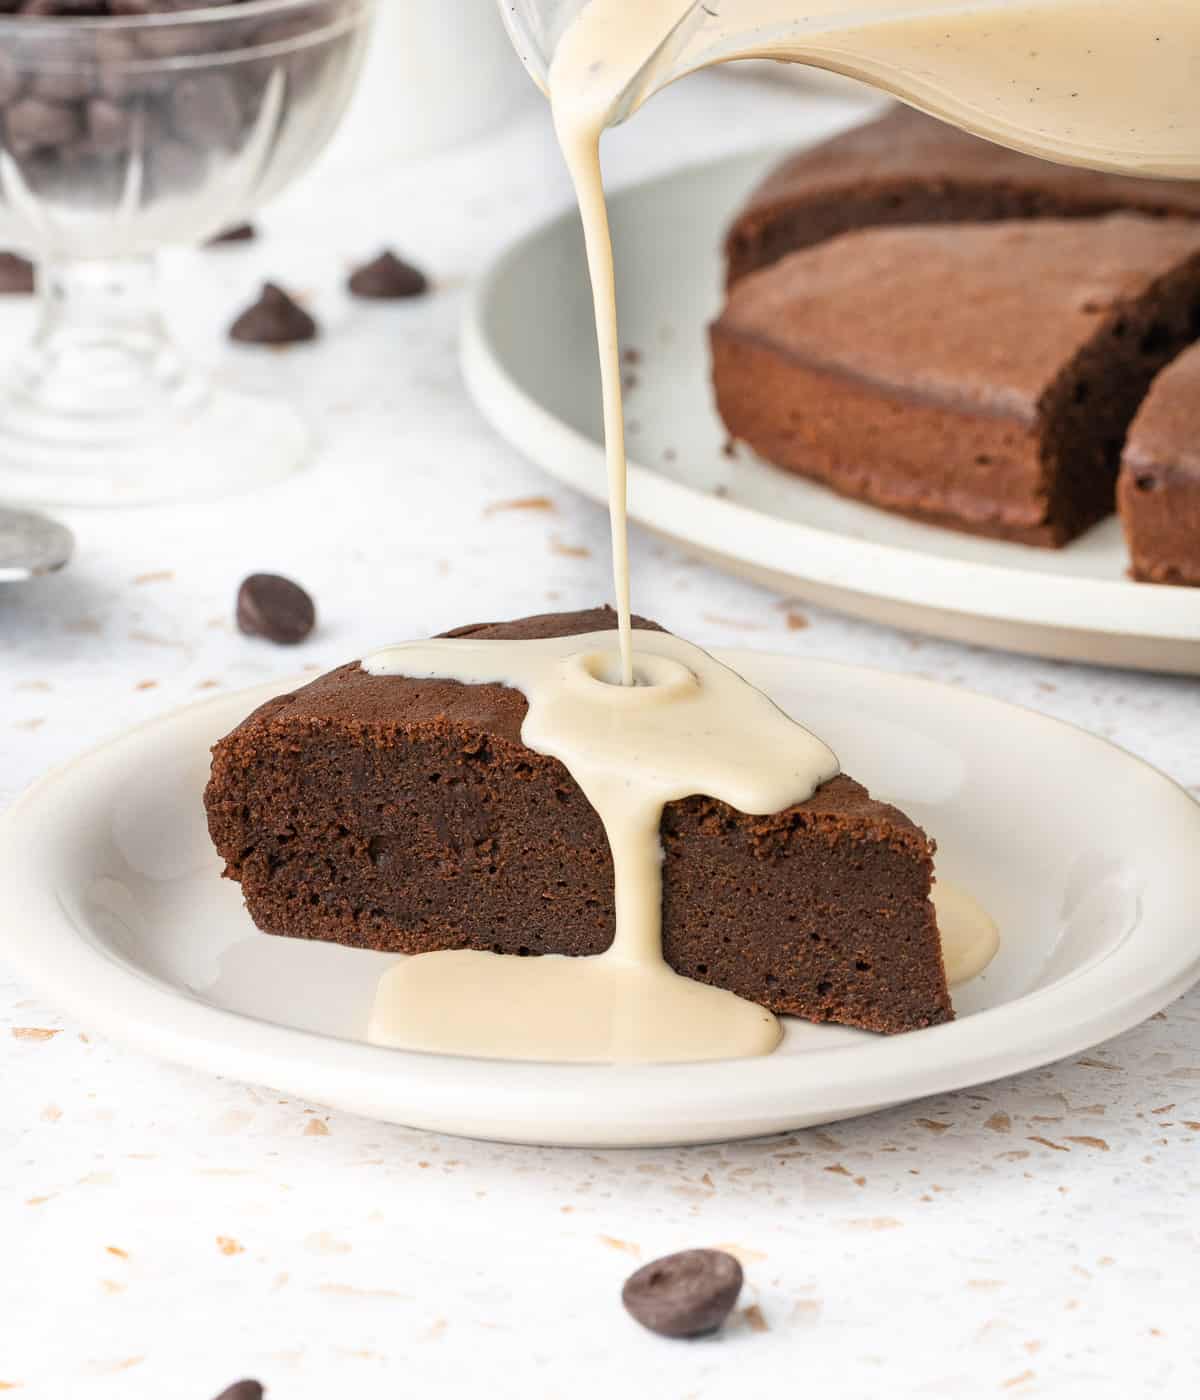 Pouring the custard over a slice of chocolate cake.